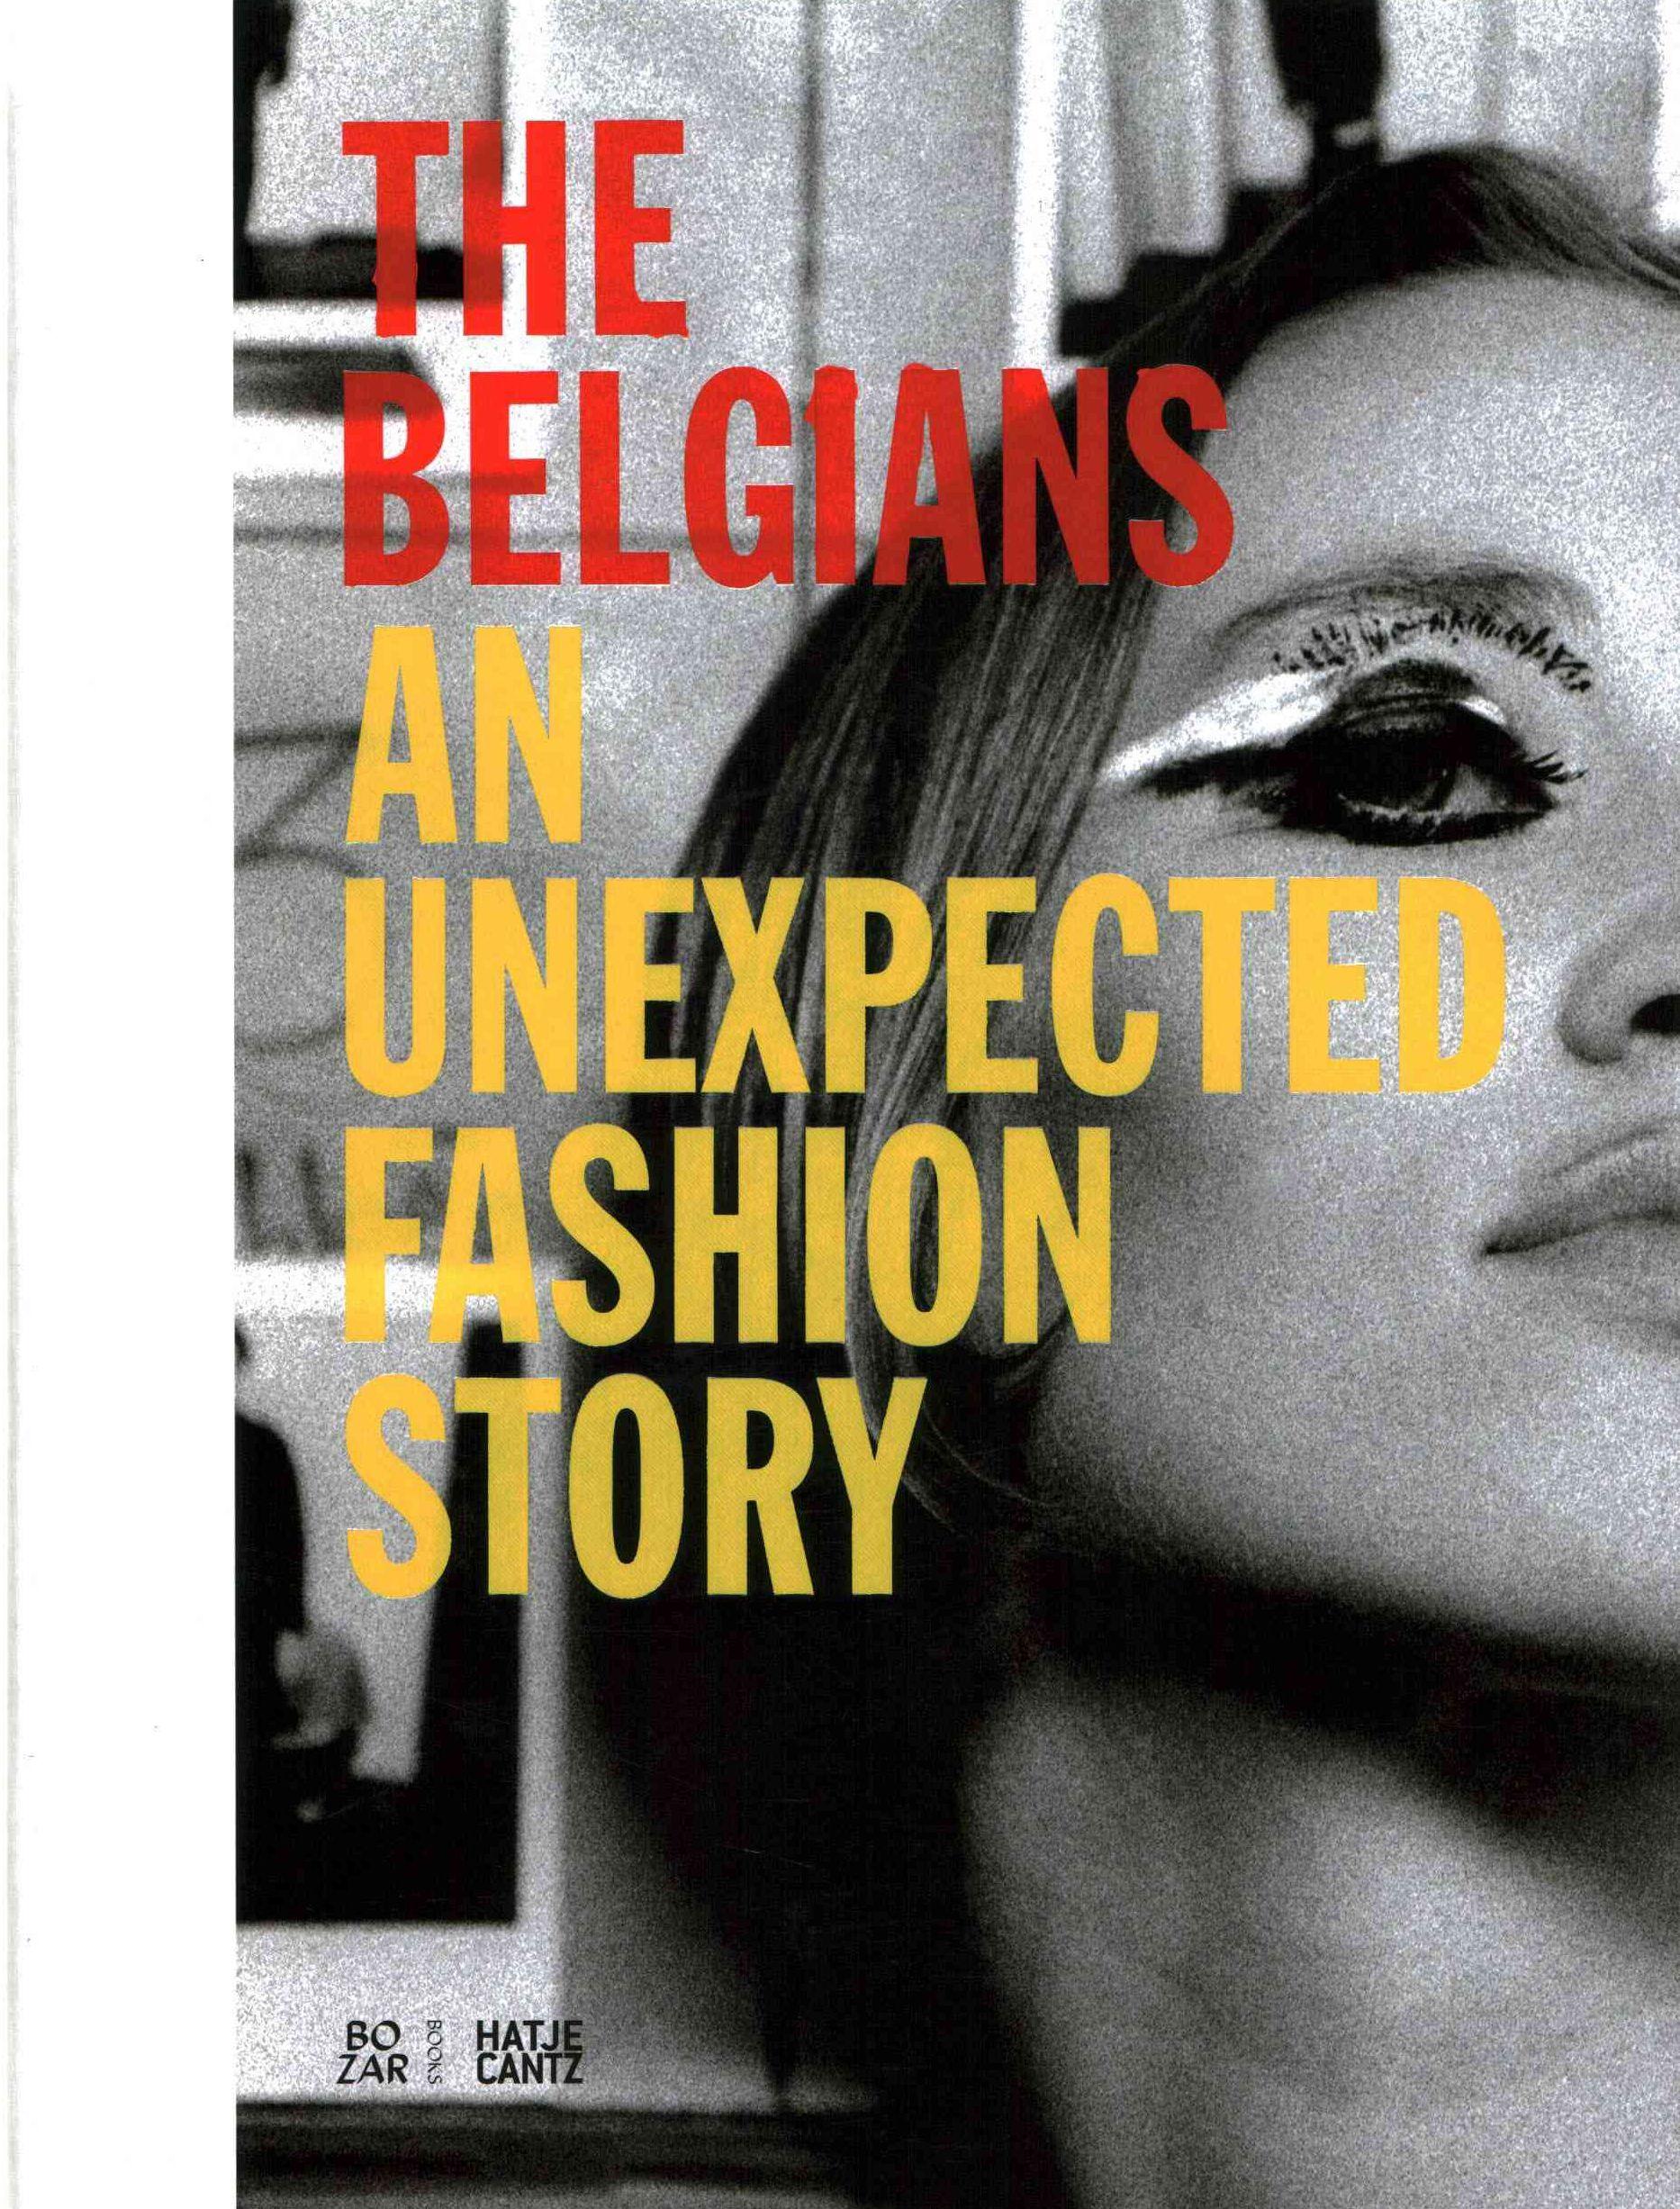 Belgians: An Unexpected Fashion Story